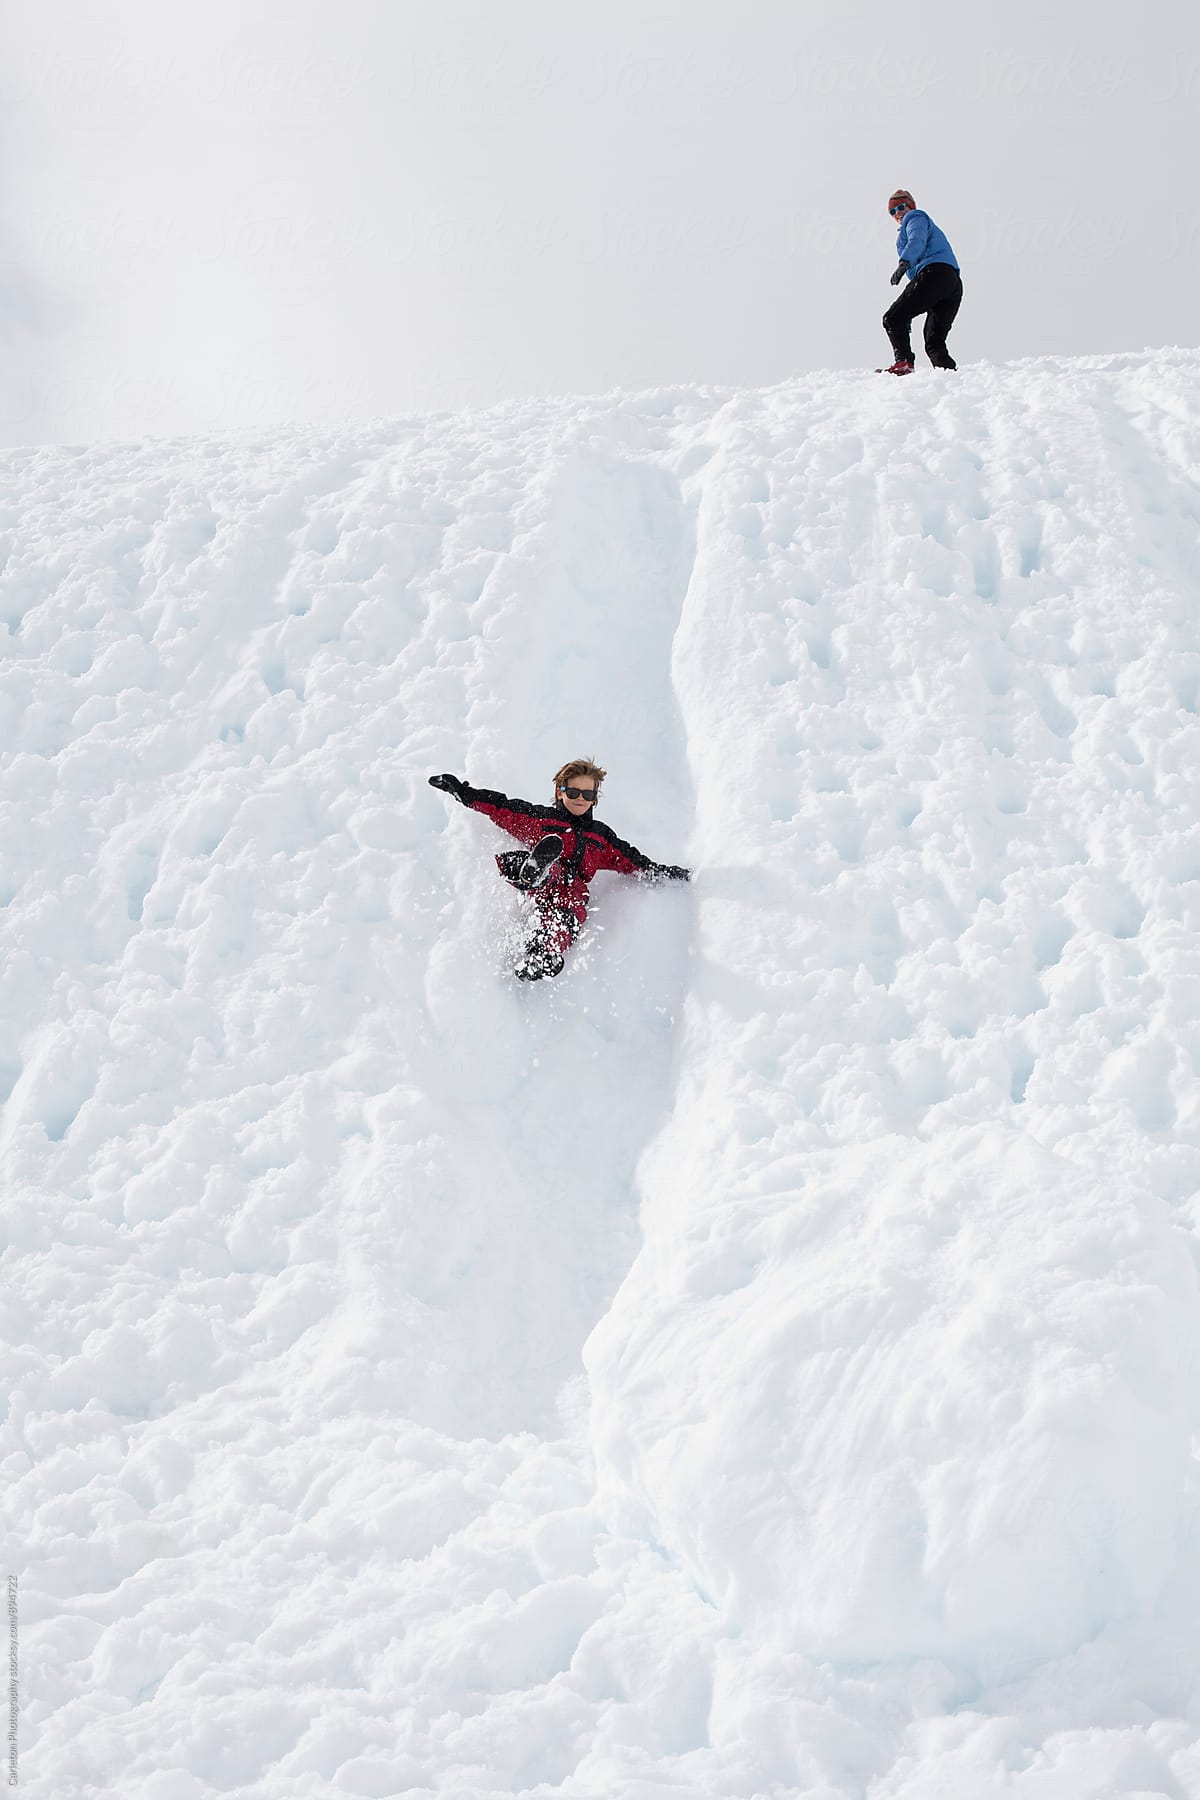 Boy flies down a snowy chute while mom looks on from the top of the hill